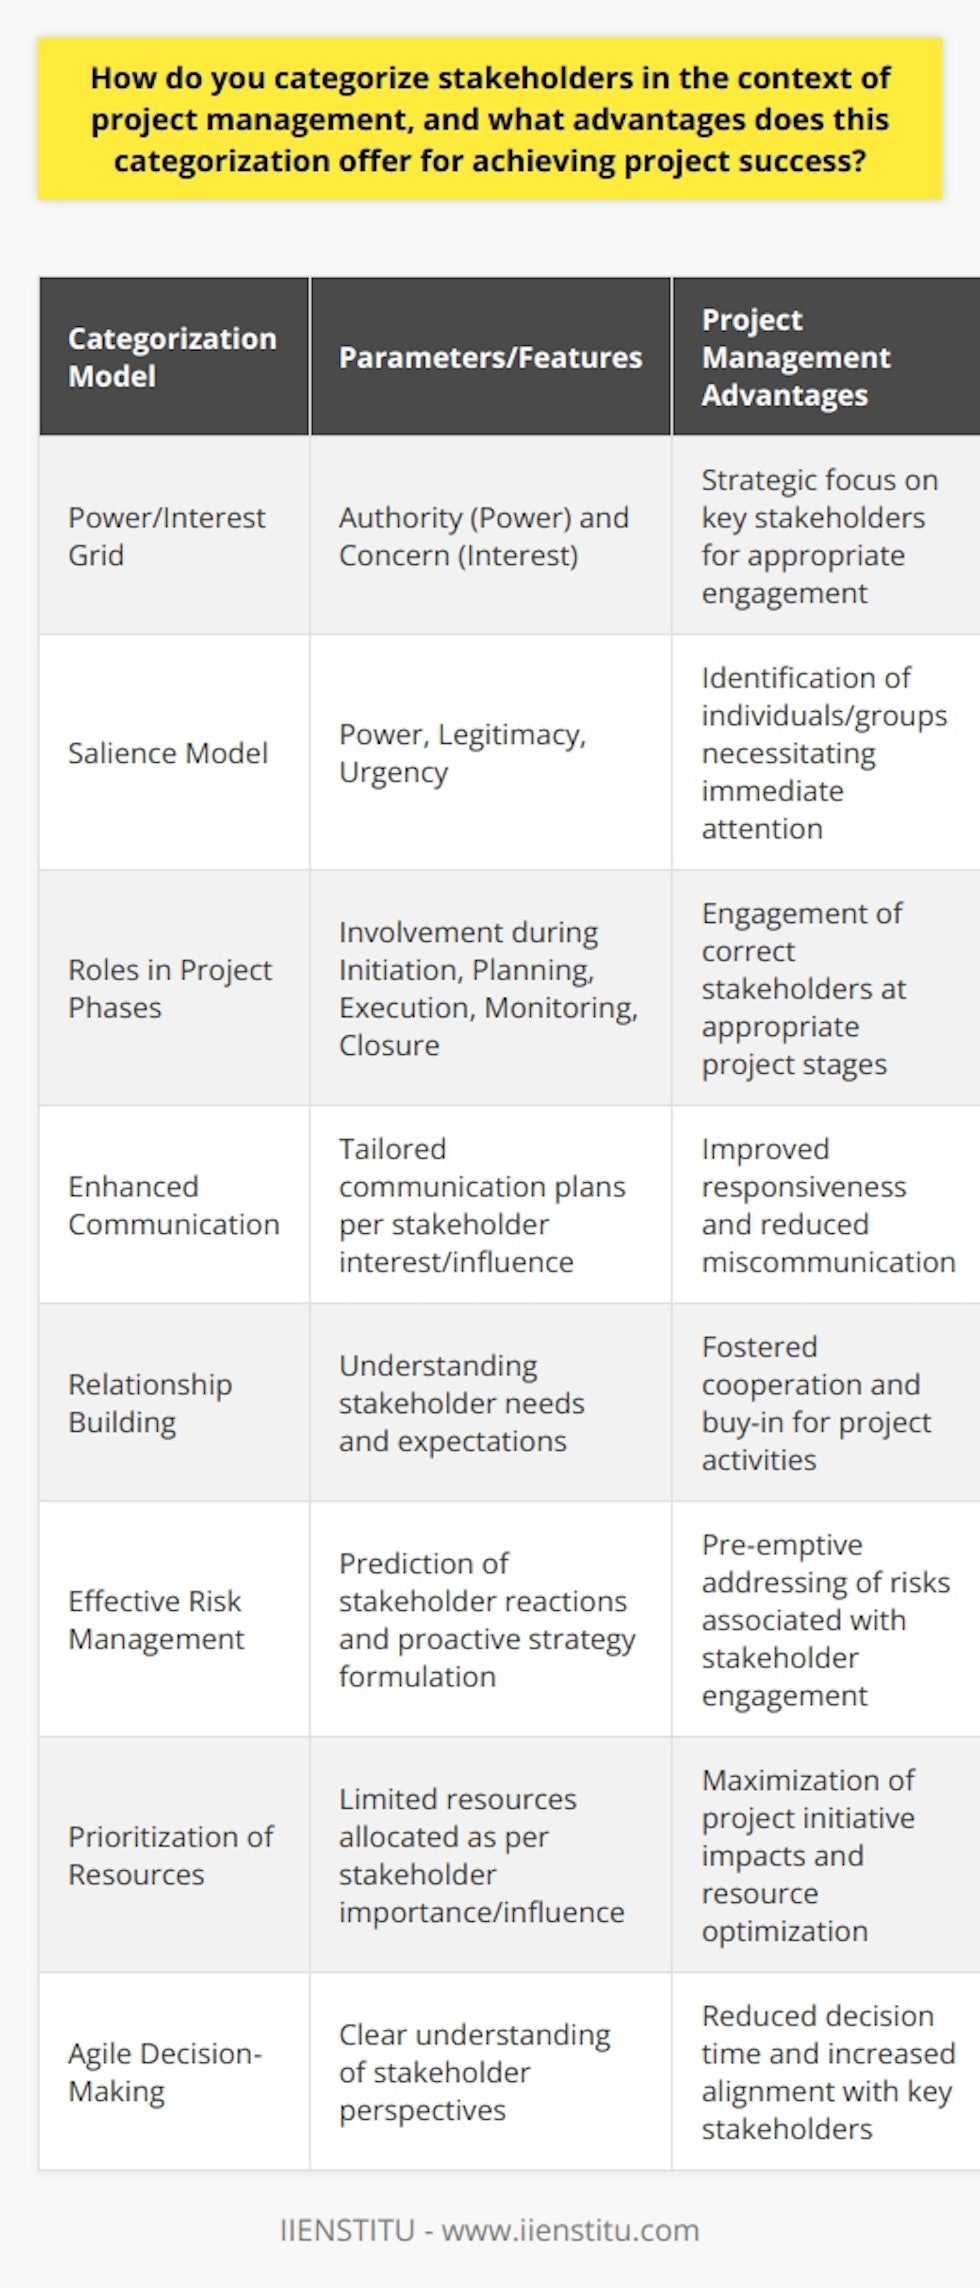 Categorization of stakeholders is a strategic approach in project management for aligning the interests, expectations, and influence of various individuals or groups that have a stake in the project outcome. This process involves systematically identifying who these stakeholders are and assigning them to different groups based upon their attributes and the nature of their involvement. Effective stakeholder categorization can significantly enhance a project's chances of success due to several key reasons.Power/Interest GridOne way to categorize stakeholders is by mapping them on a Power/Interest Grid, distinguishing them based on their level of authority (power) and their level of concern (interest) regarding the project's outcomes. This allows for strategic focus on high-power, highly interested parties and ensures they are appropriately engaged.Salience ModelAnother classification model is the Salience Model which categorizes stakeholders based on three parameters: power, legitimacy, and urgency. This can help in the recognition of stakeholders who can claim immediate attention due to their significant influence, legitimate relationship, or the urgency of their needs in relation to the project.Roles in Project PhasesStakeholders can also be categorized based on their role and involvement during different phases of the project lifecycle, such as initiation, planning, execution, monitoring, and closure. This ensures that the right stakeholders are engaged at the right time for effective decision-making.Advantages of Categorizing Stakeholders:- Enhanced Communication: Categorization allows project managers to tailor communication plans, ensuring stakeholders receive information that is relevant to their interest and influence, enhancing responsiveness and reducing confusion.  - Relationship Building: By understanding the specific needs and expectations of different stakeholder groups, project teams can build strong relationships to foster cooperation and buy-in, which are necessary for smooth project execution.- Effective Risk Management: Knowing stakeholder categories helps to predict their potential reactions and formulate strategies to mitigate their concerns—proactively addressing risks associated with stakeholder engagement and expectations.- Prioritization of Resources: Projects often have limited resources, and stakeholder categorization aids in prioritizing these according to the importance and influence of each stakeholder group, maximizing the impact of the project's initiatives.- Agile Decision-Making: With a clearer understanding of stakeholders, project managers can make more informed decisions that align with the most influential and affected parties, reducing decision-making time and infighting.In conlusion, stakeholder categorization in project management is a vital endeavor that contributes substantially to the tenets of good governance and project efficiency. It is an exercise in ensuring that stakeholder diversity is recognized, understood, and managed effectively. By investing time into this process, project managers can create a foundation for stakeholder engagement that paves the way for project success. Institutions that provide project management education, such as IIENSTITU, emphasize the importance of stakeholder analysis and engagement as a core skill for project managers to master.